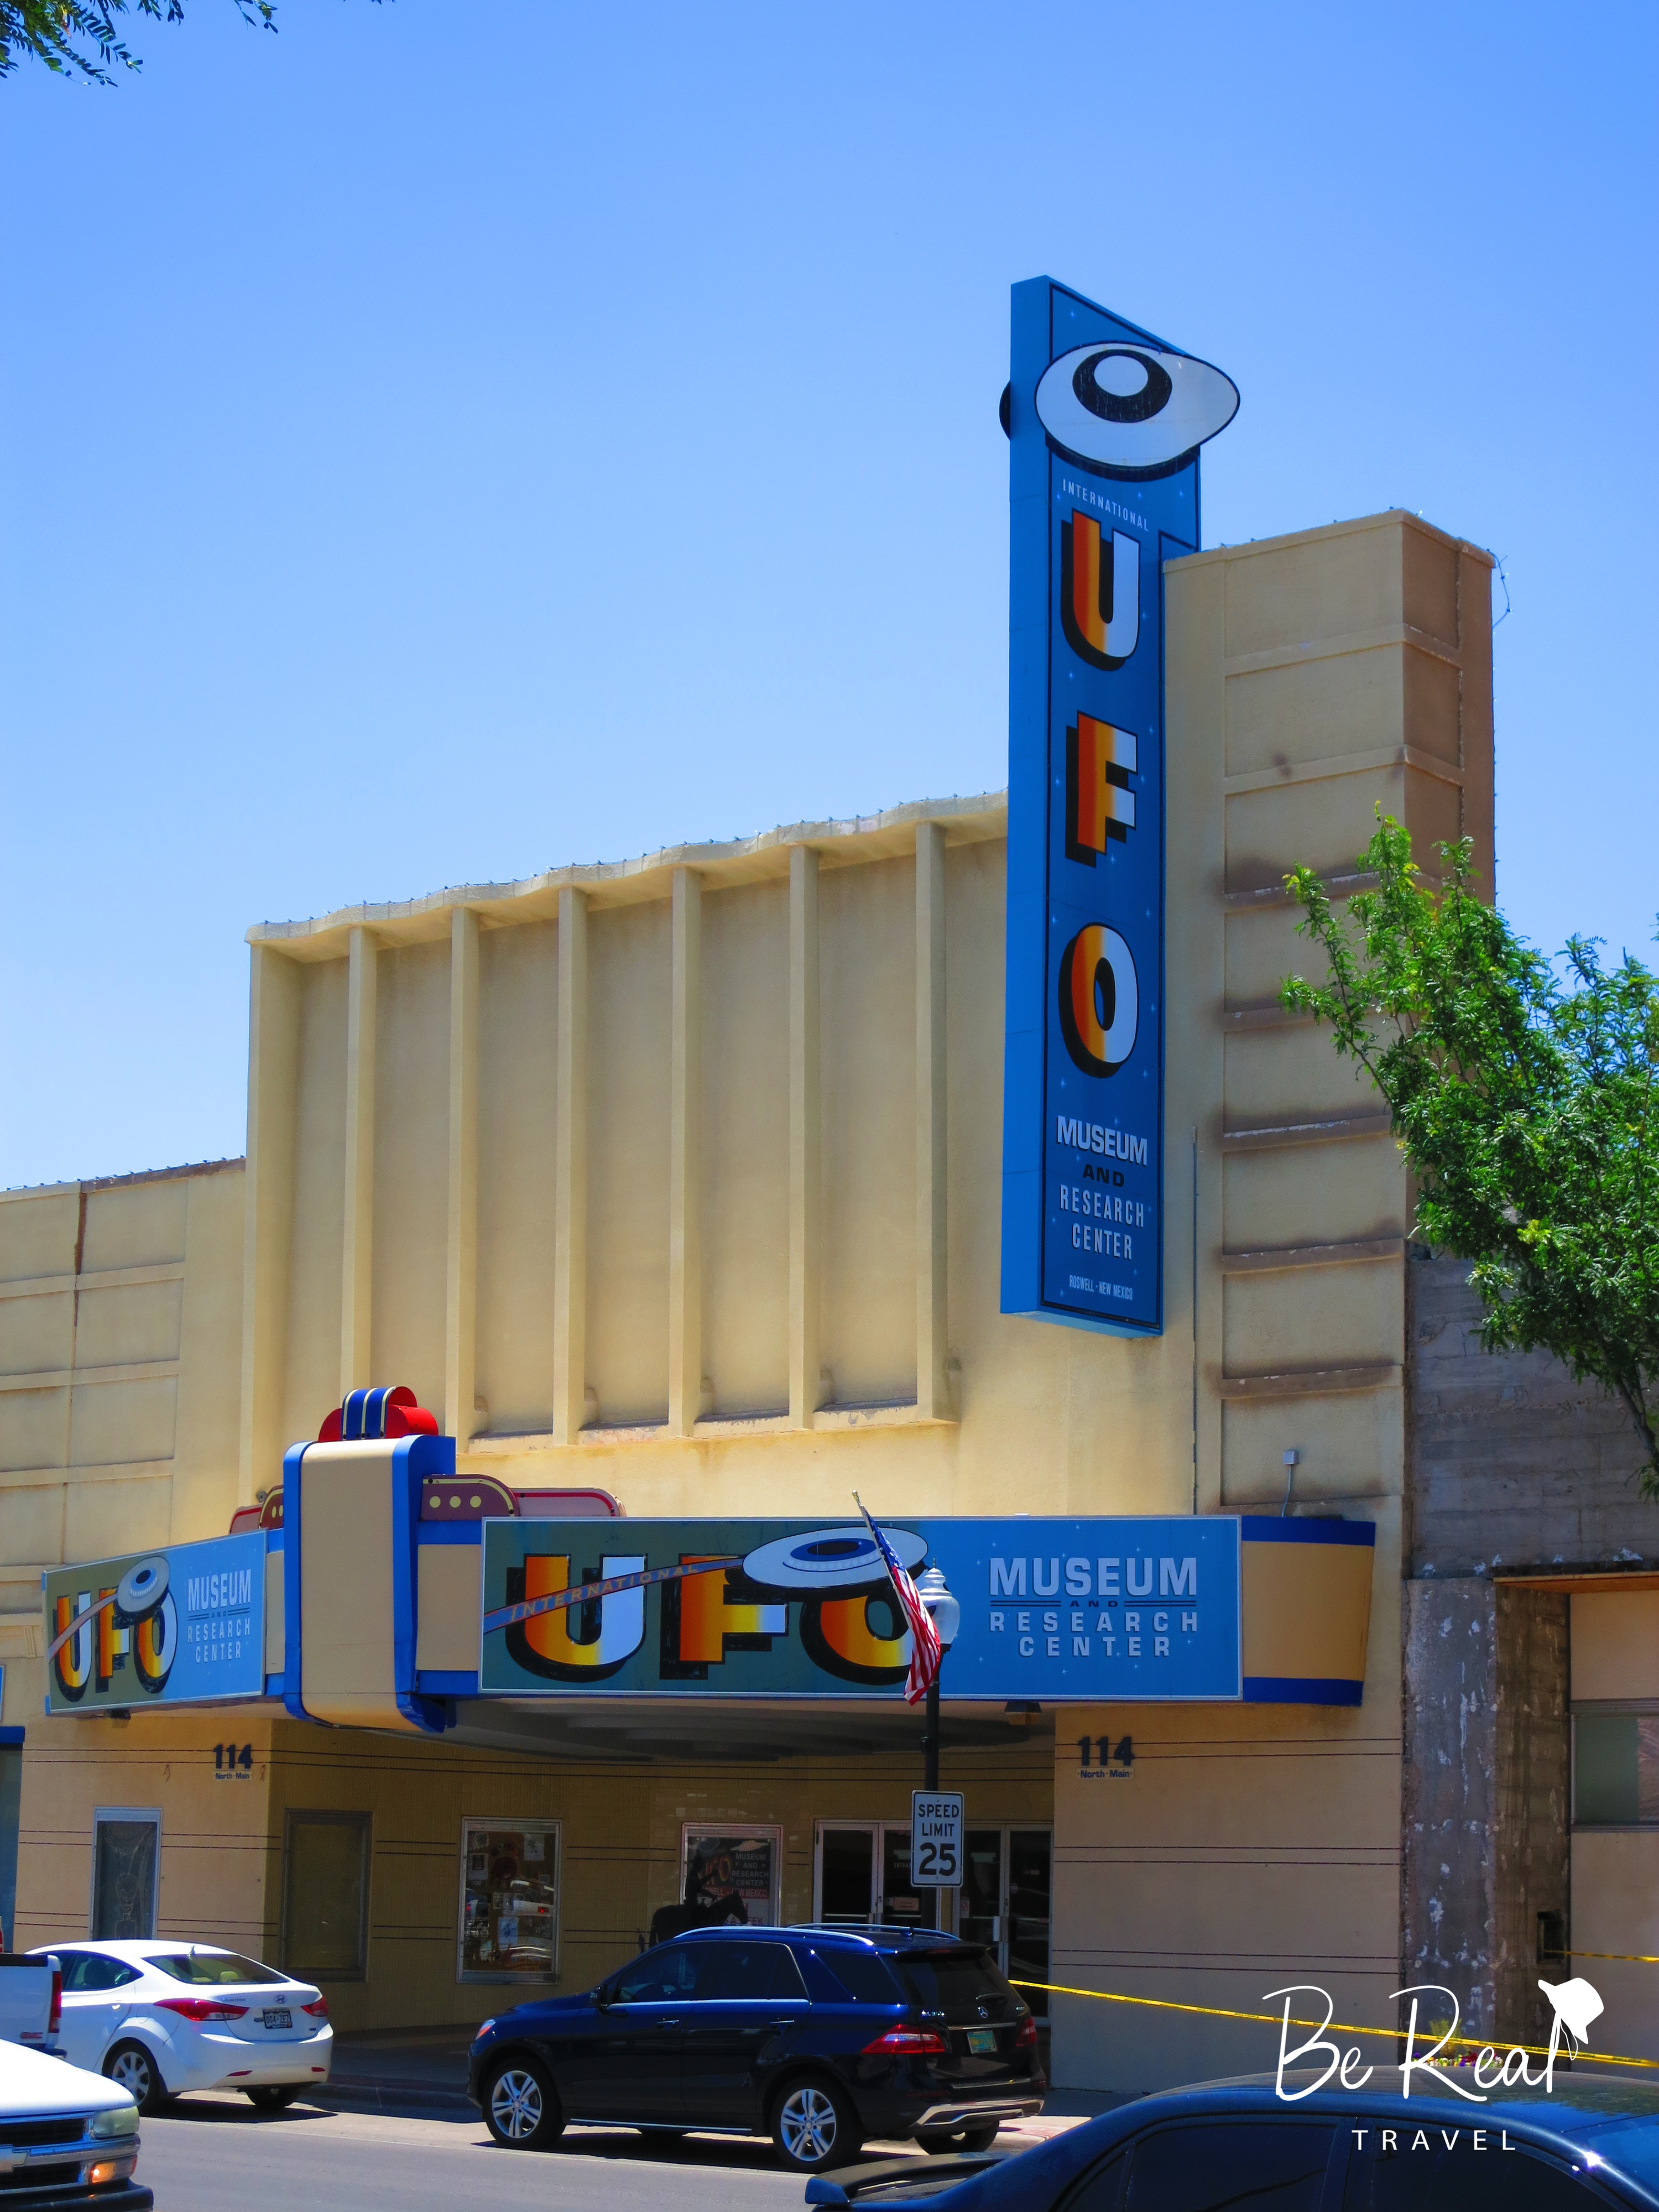 The UFO Museum and Research Center features a UFO in Roswell, New Mexico